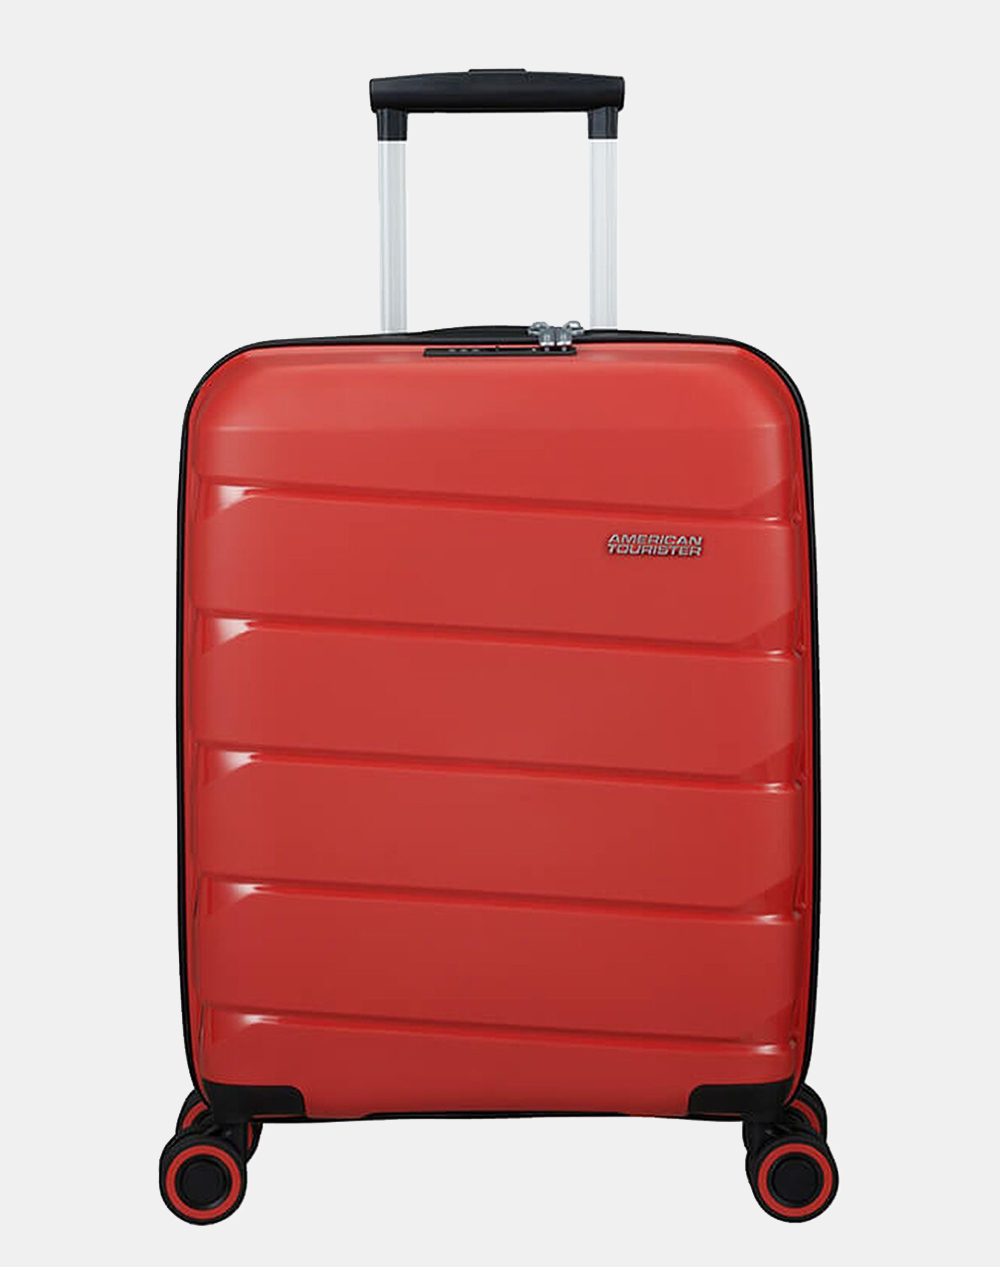 AMERICAN TOURISTER AMERICAN TOURISTER ΒΑΛΙΤΣΑ AIR MOVE-SPINNER ( Διαστάσεις: 55 x 40 x 20 cm ) 139254-SM1226-SM1226 Red